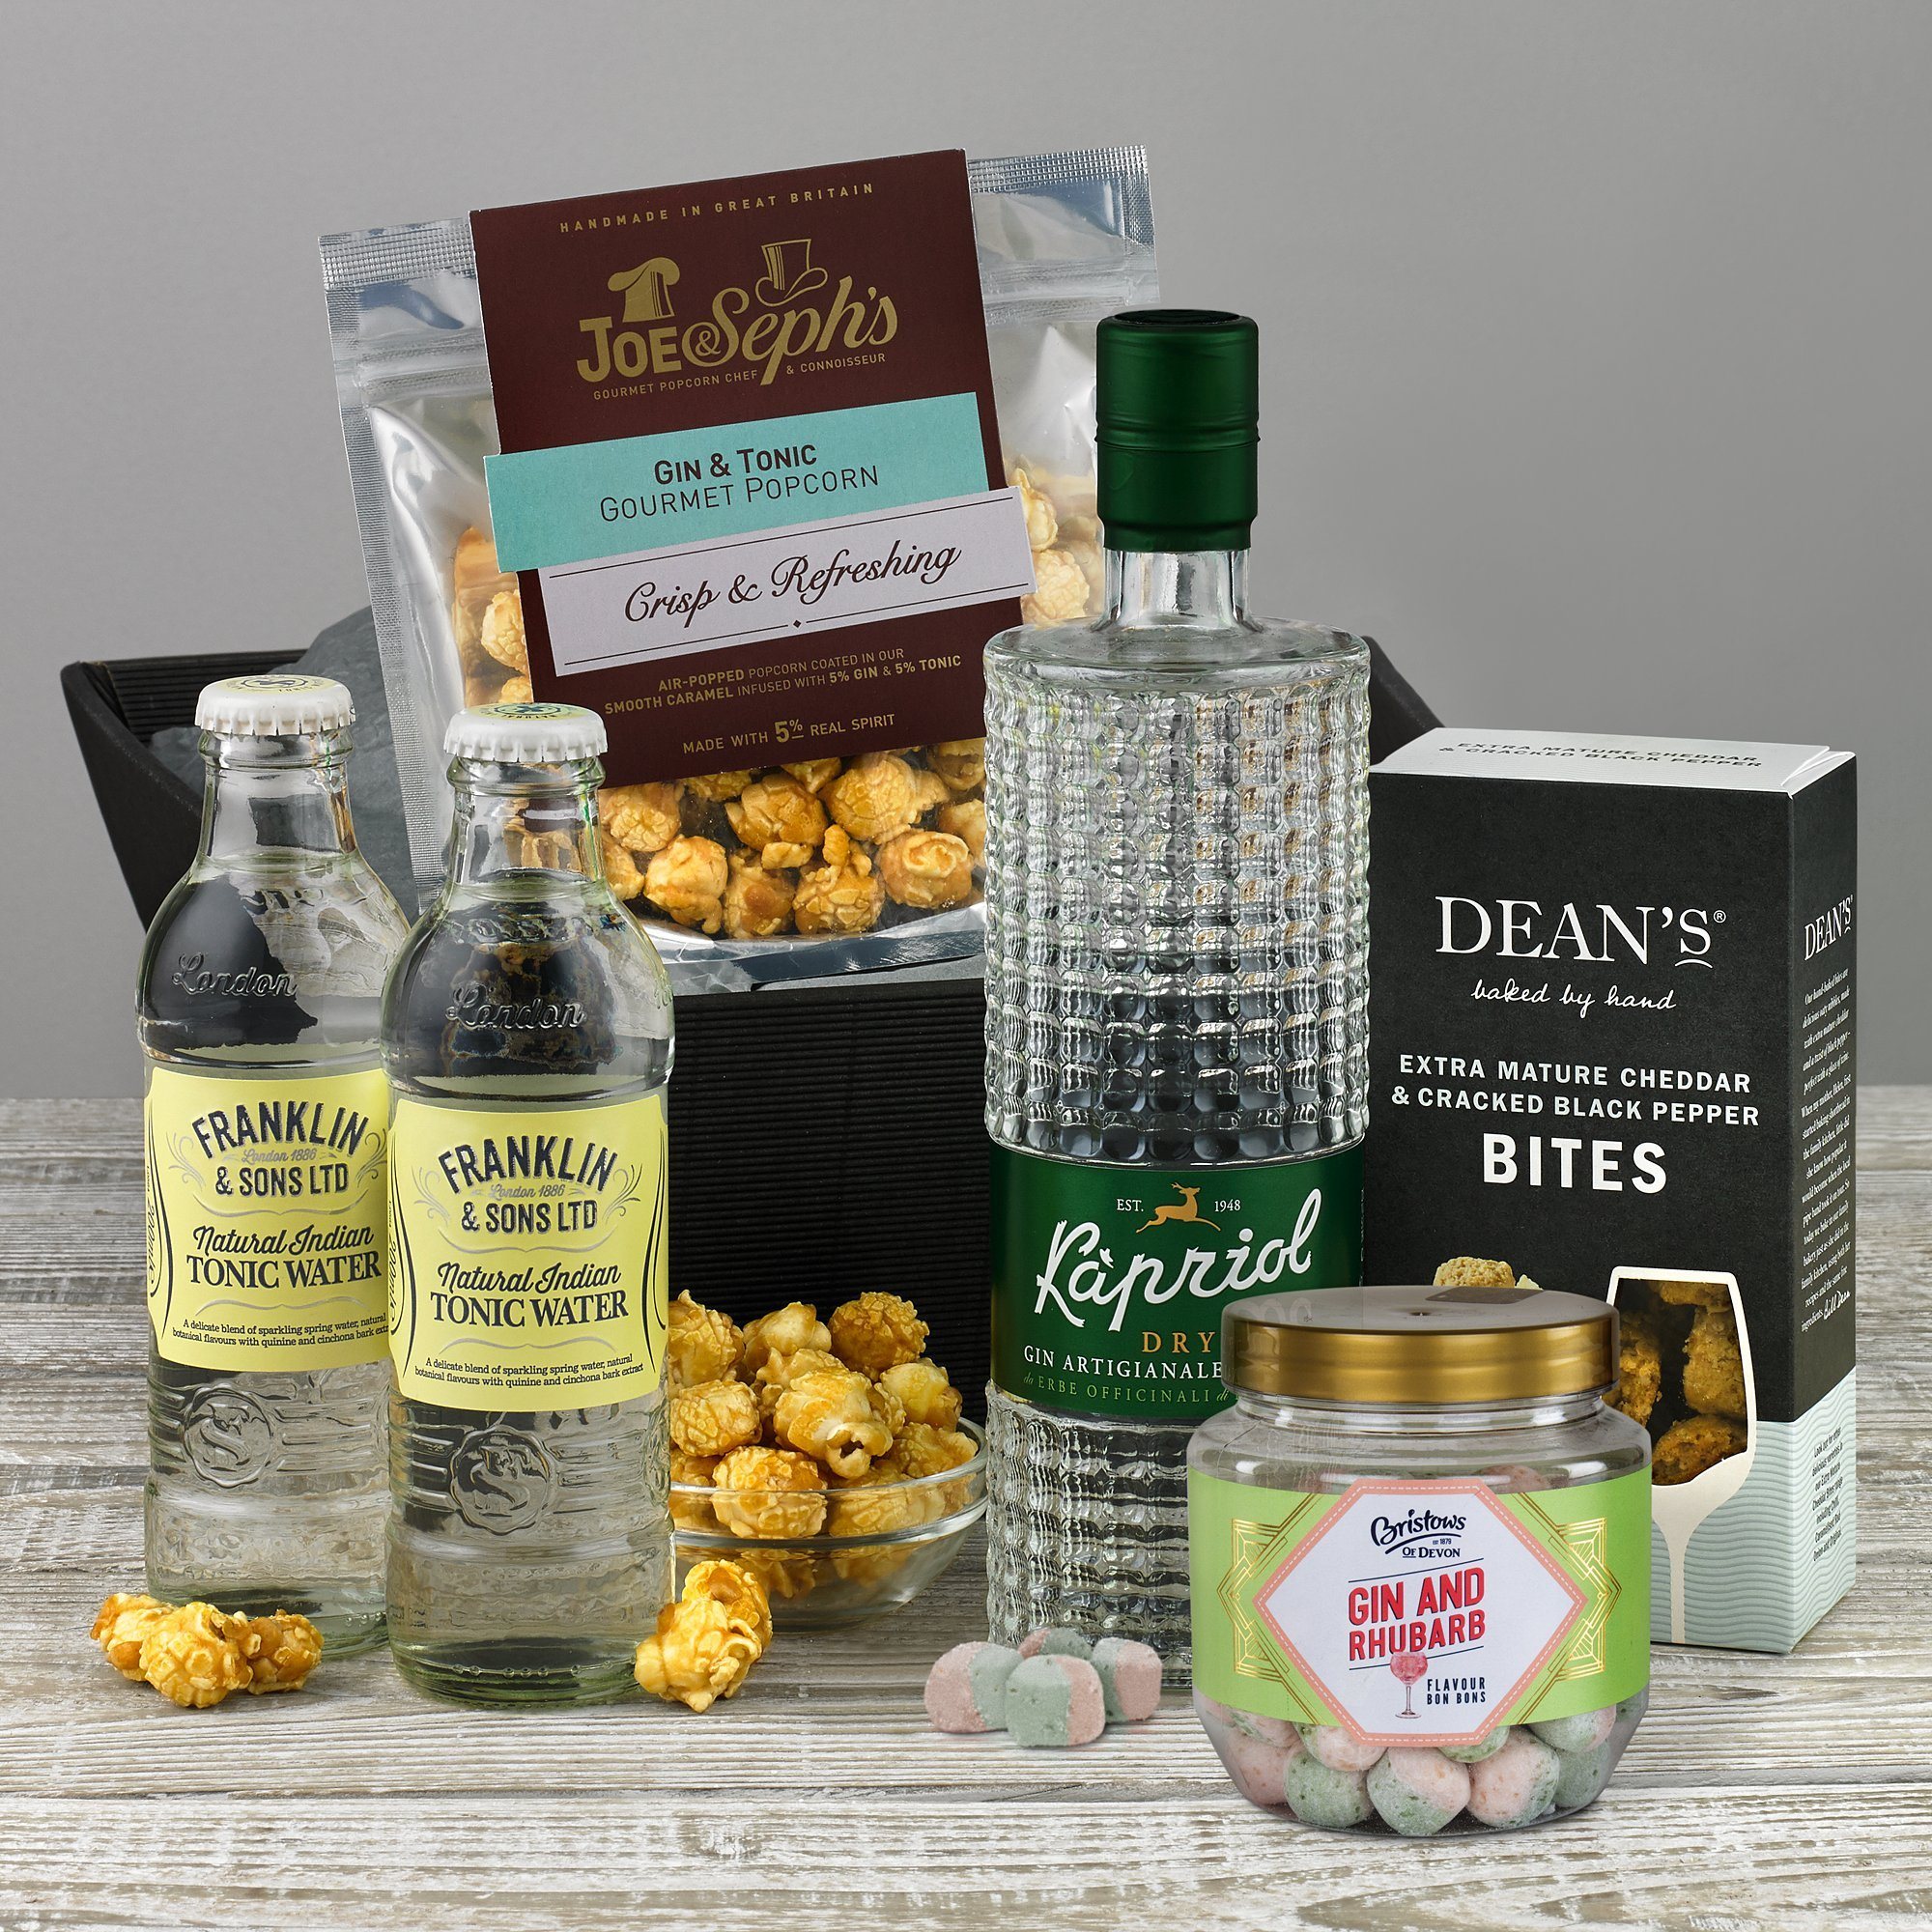 Gin & Tonic Connoisseurs Gift